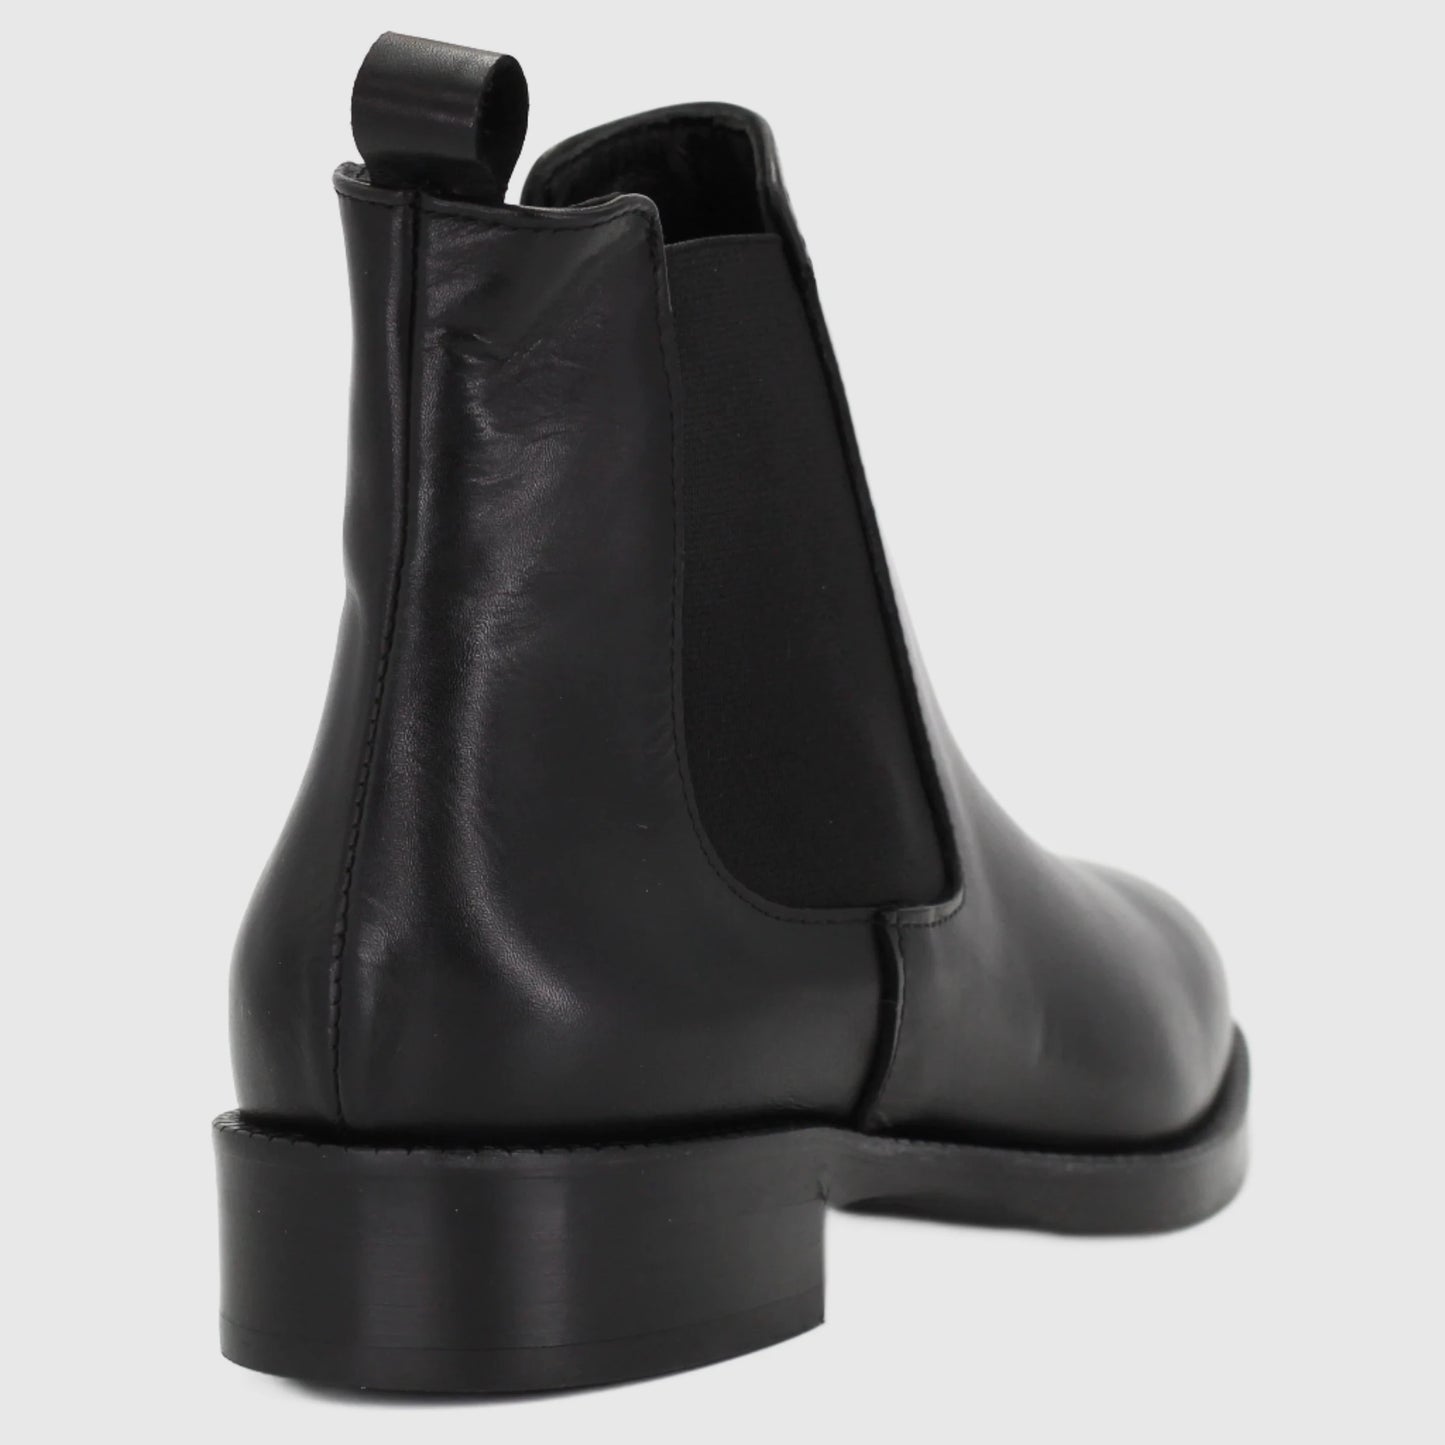 Shop Handmade Italian Leather chelsea boot in nero (GC2030) or browse our range of hand-made Italian shoes in leather or suede in-store at Aliverti Cape Town, or shop online. We deliver in South Africa & offer multiple payment plans as well as accept multiple safe & secure payment methods.